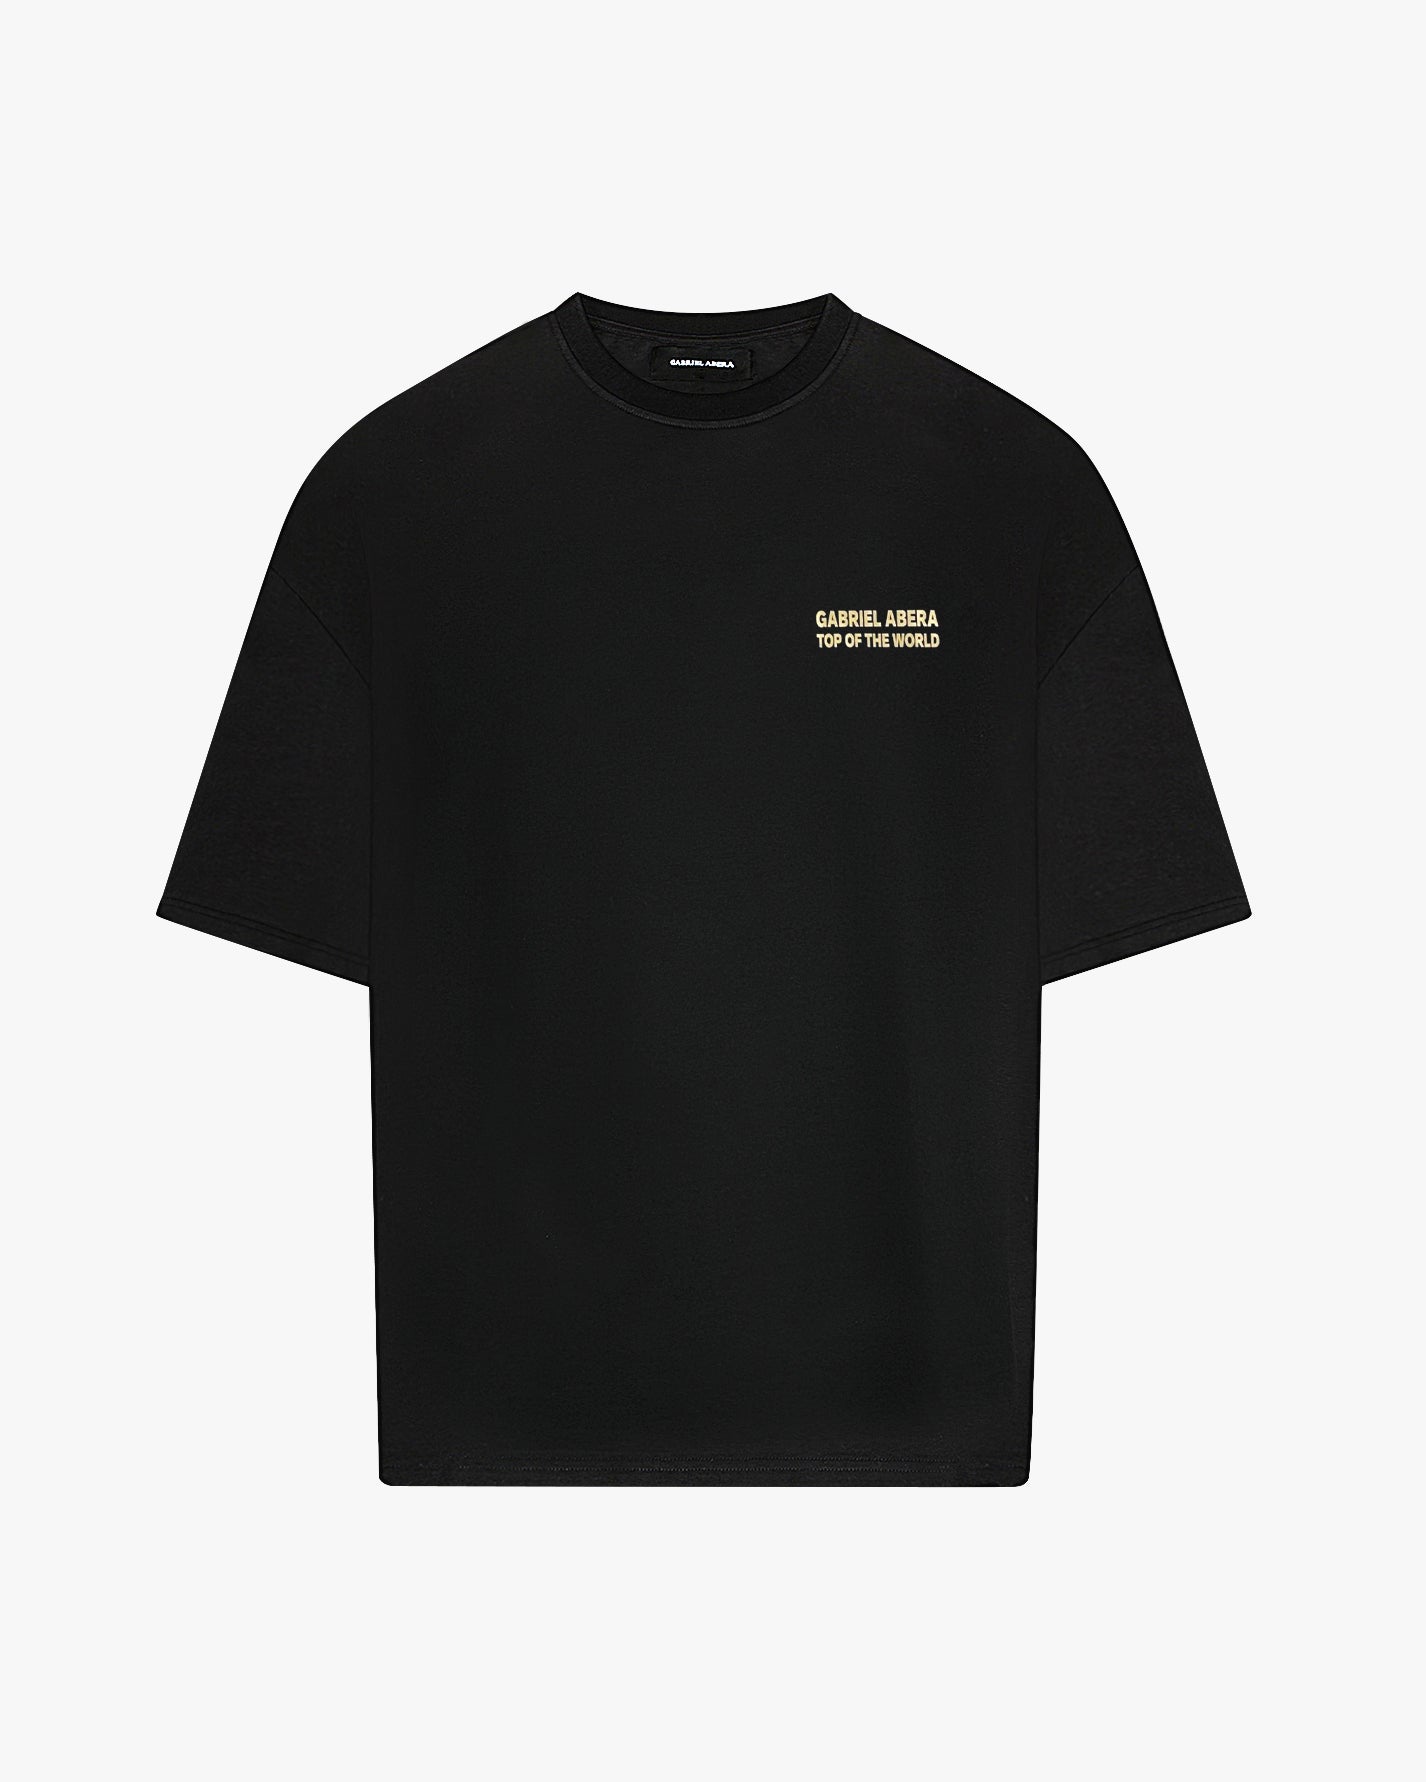 Black oversize tshirt with gold brand name design on the front